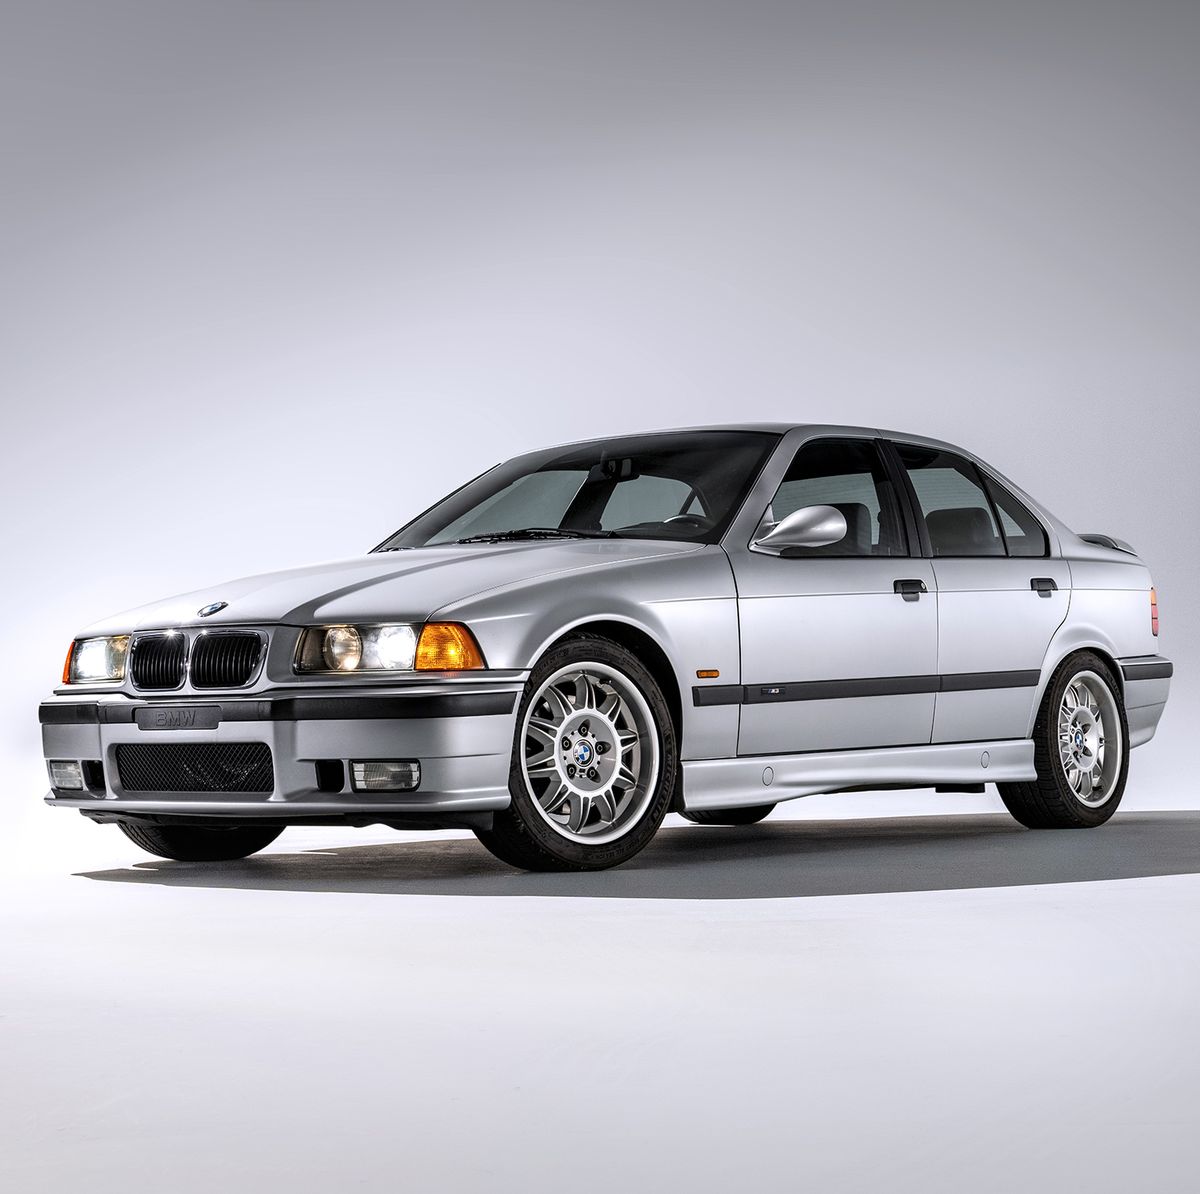 E36 BMW M3 Lightweight Is The Coolest M3 Built For America